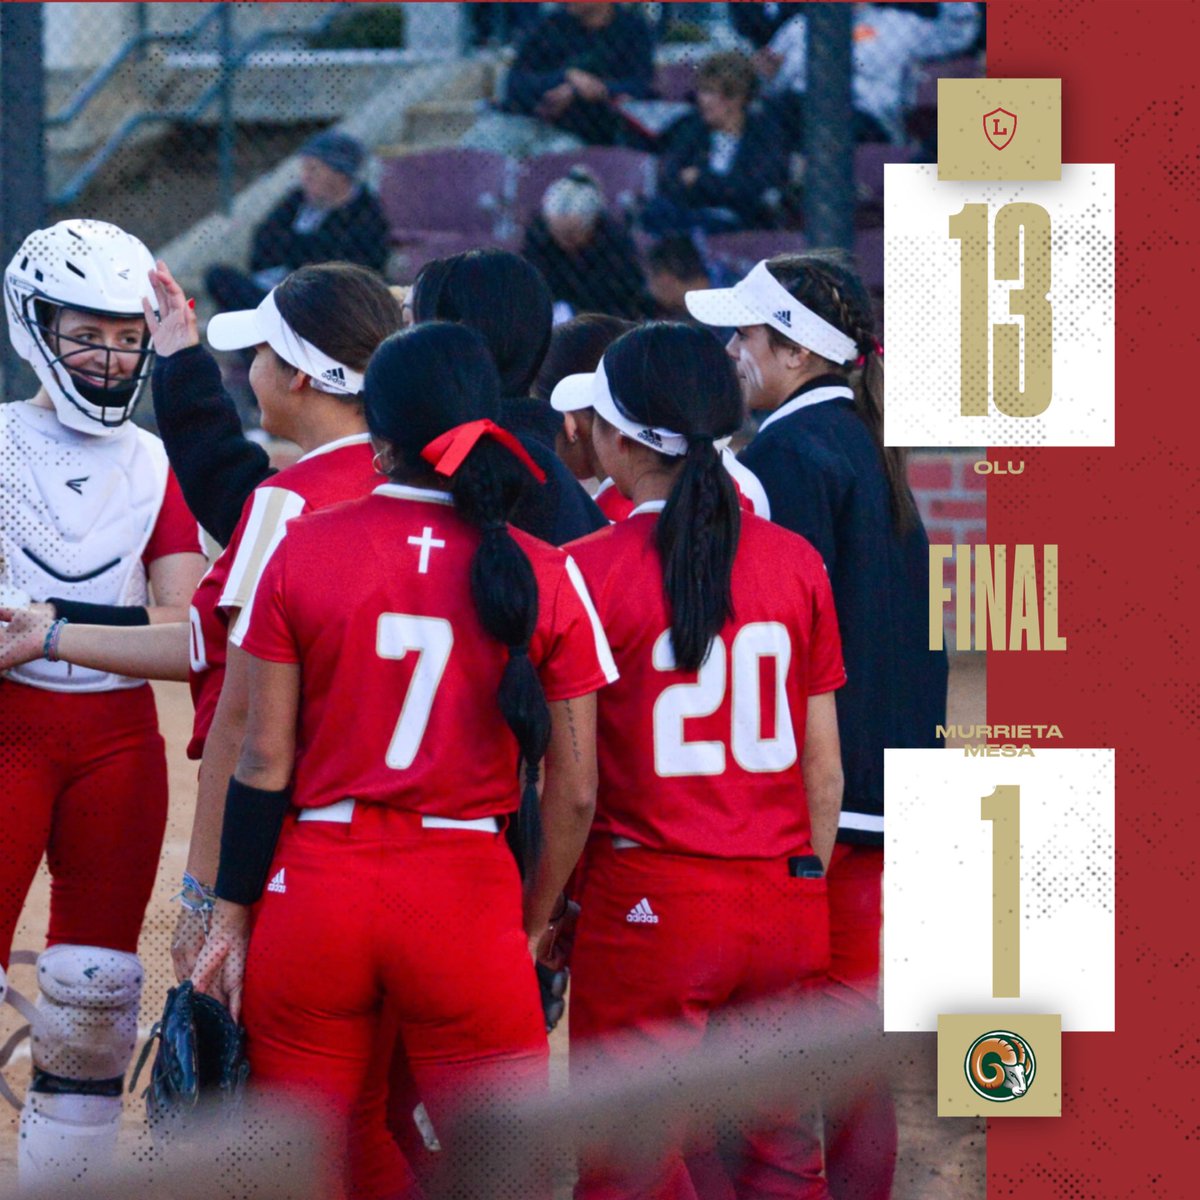 OLu (21-3) defeats Murrieta Mesa 13-1 to head to the CIF finals! Brianne Weiss (19-1) throws a 2 hitter with 12 ks. Lancers offense came alive working 12 walks and 11 hits. Kai Minor 3-5 with 2 doubles and 2 rbi. Chloe McGreevey with a 2 rbi double. @latsondheimer @ocvarsityguy